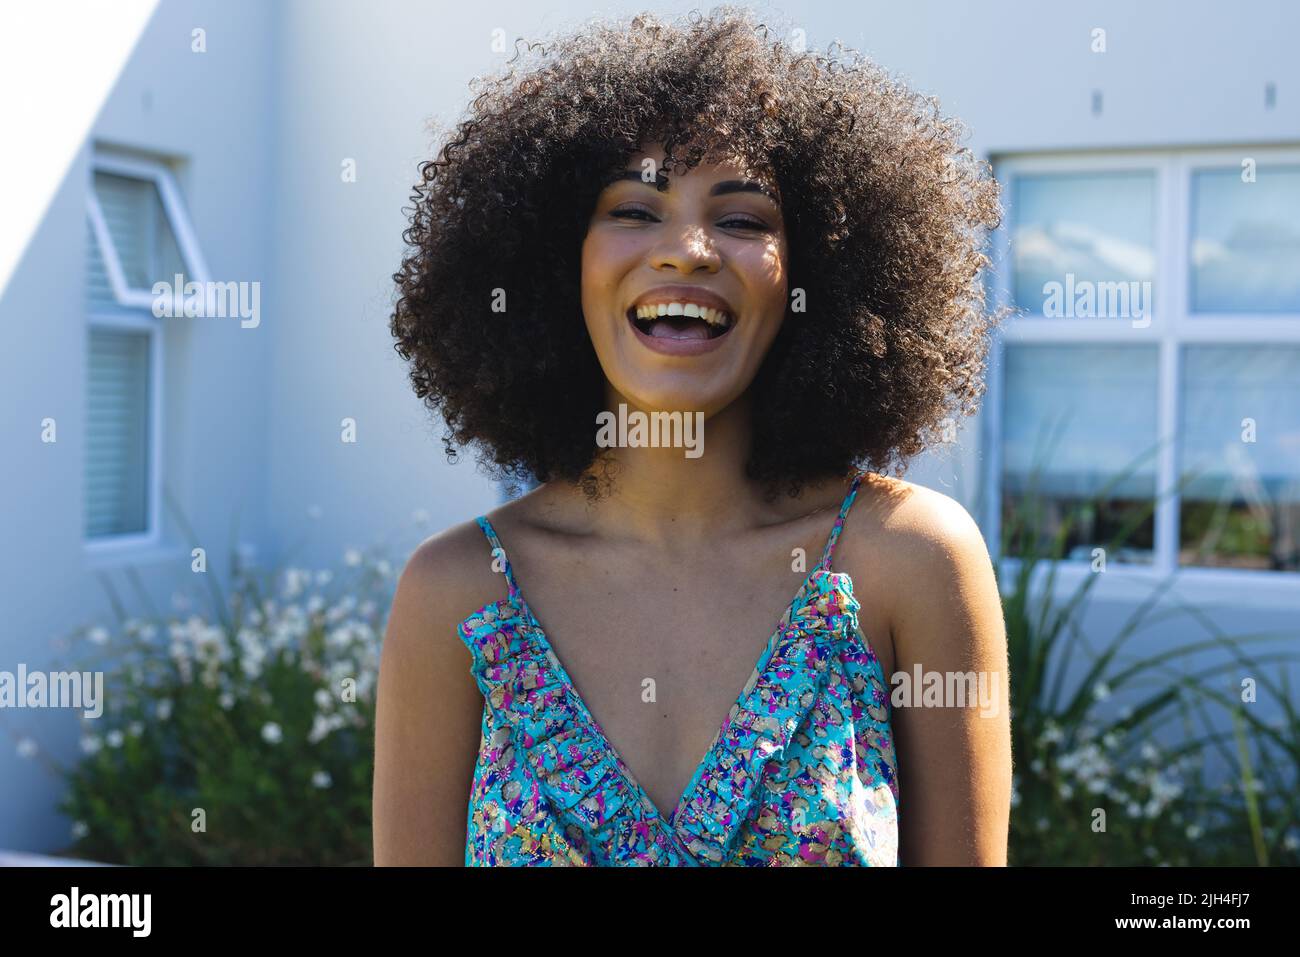 Portrait of biracial beautiful mid adult woman with afro hair laughing against house in yard Stock Photo